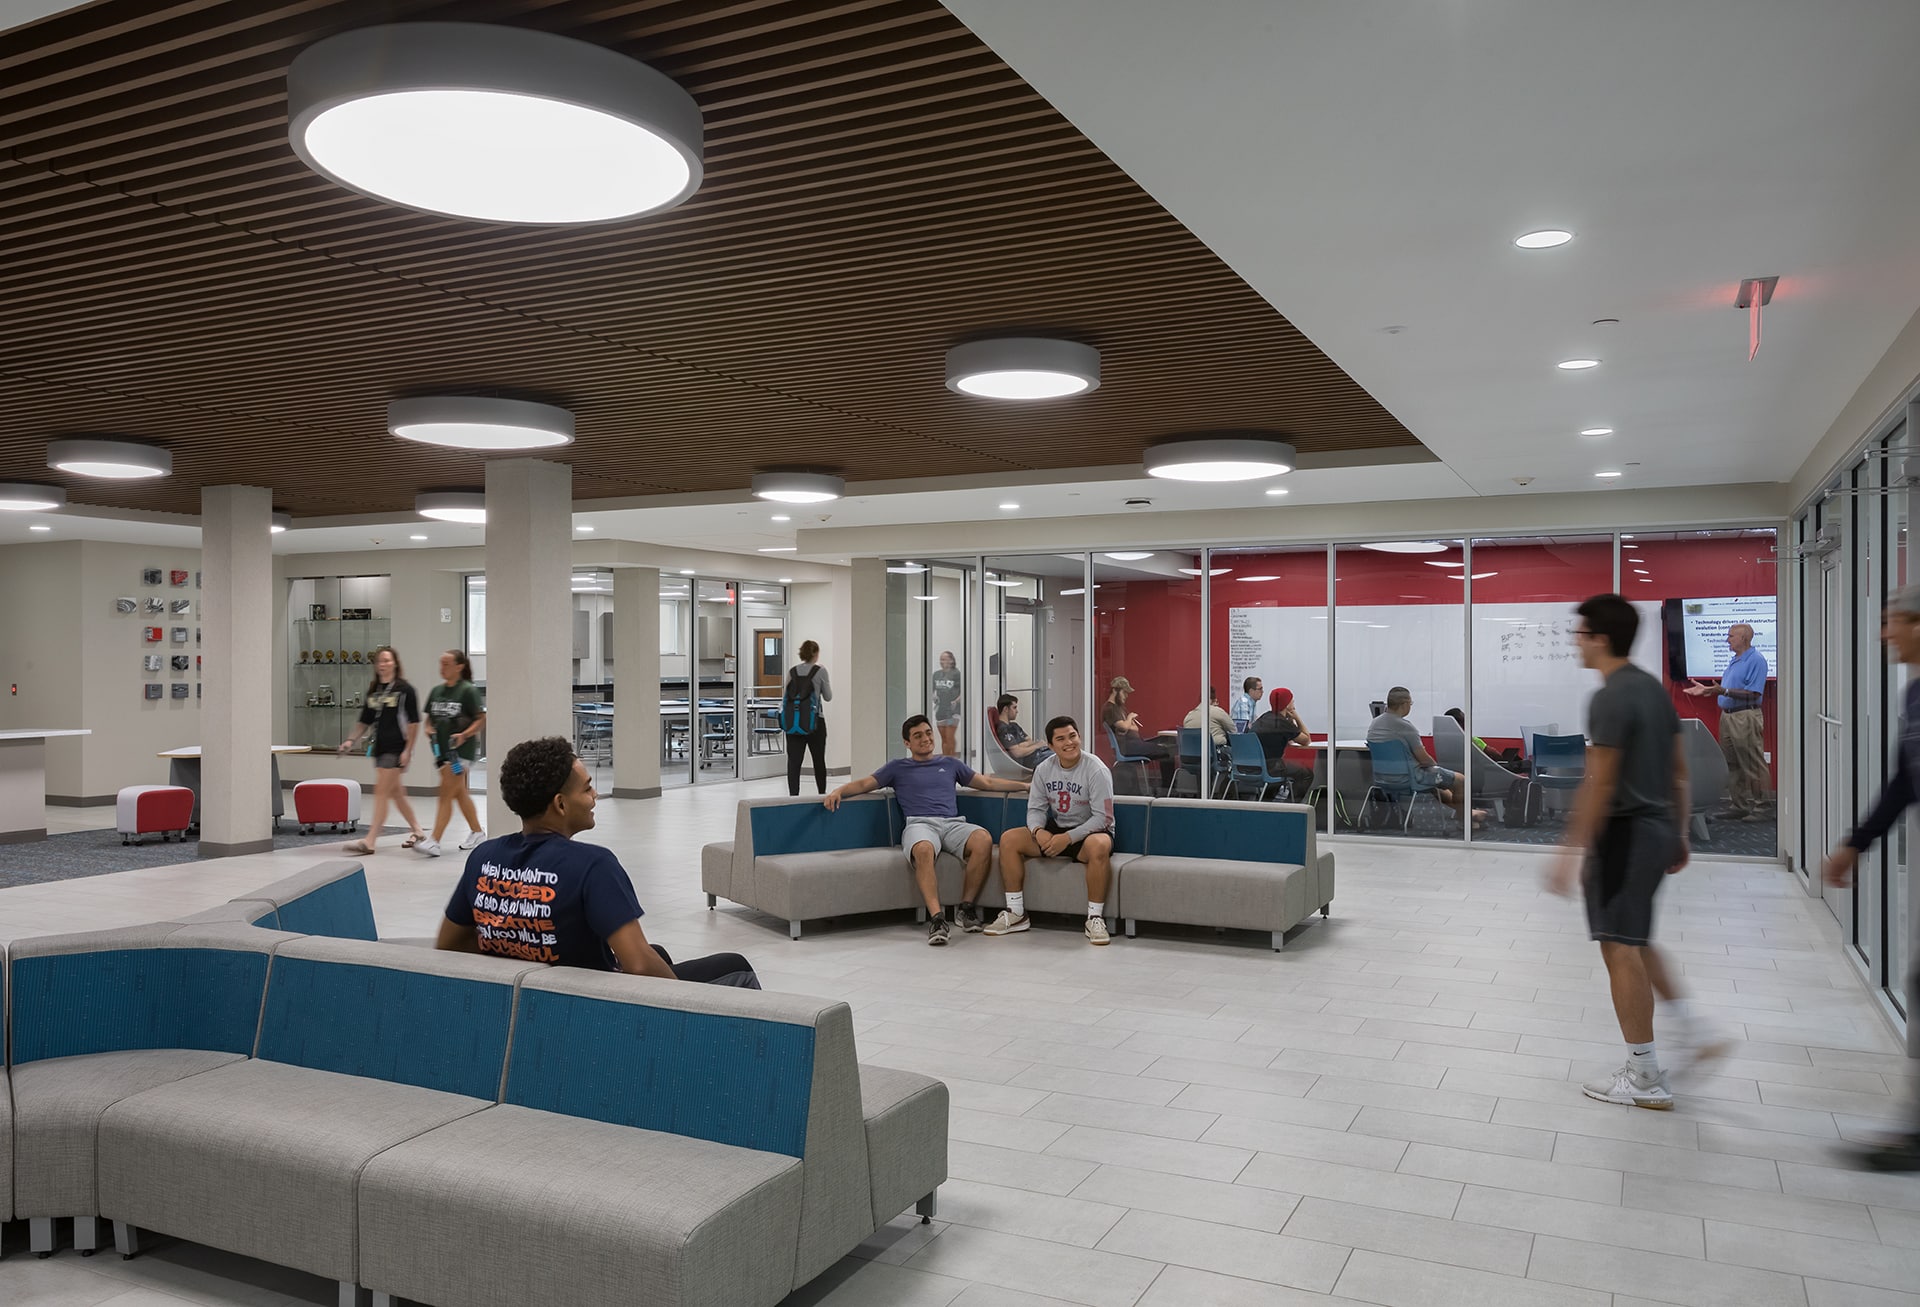 interior of central methodist university science building renovated by trivers architectural firm in st. louis